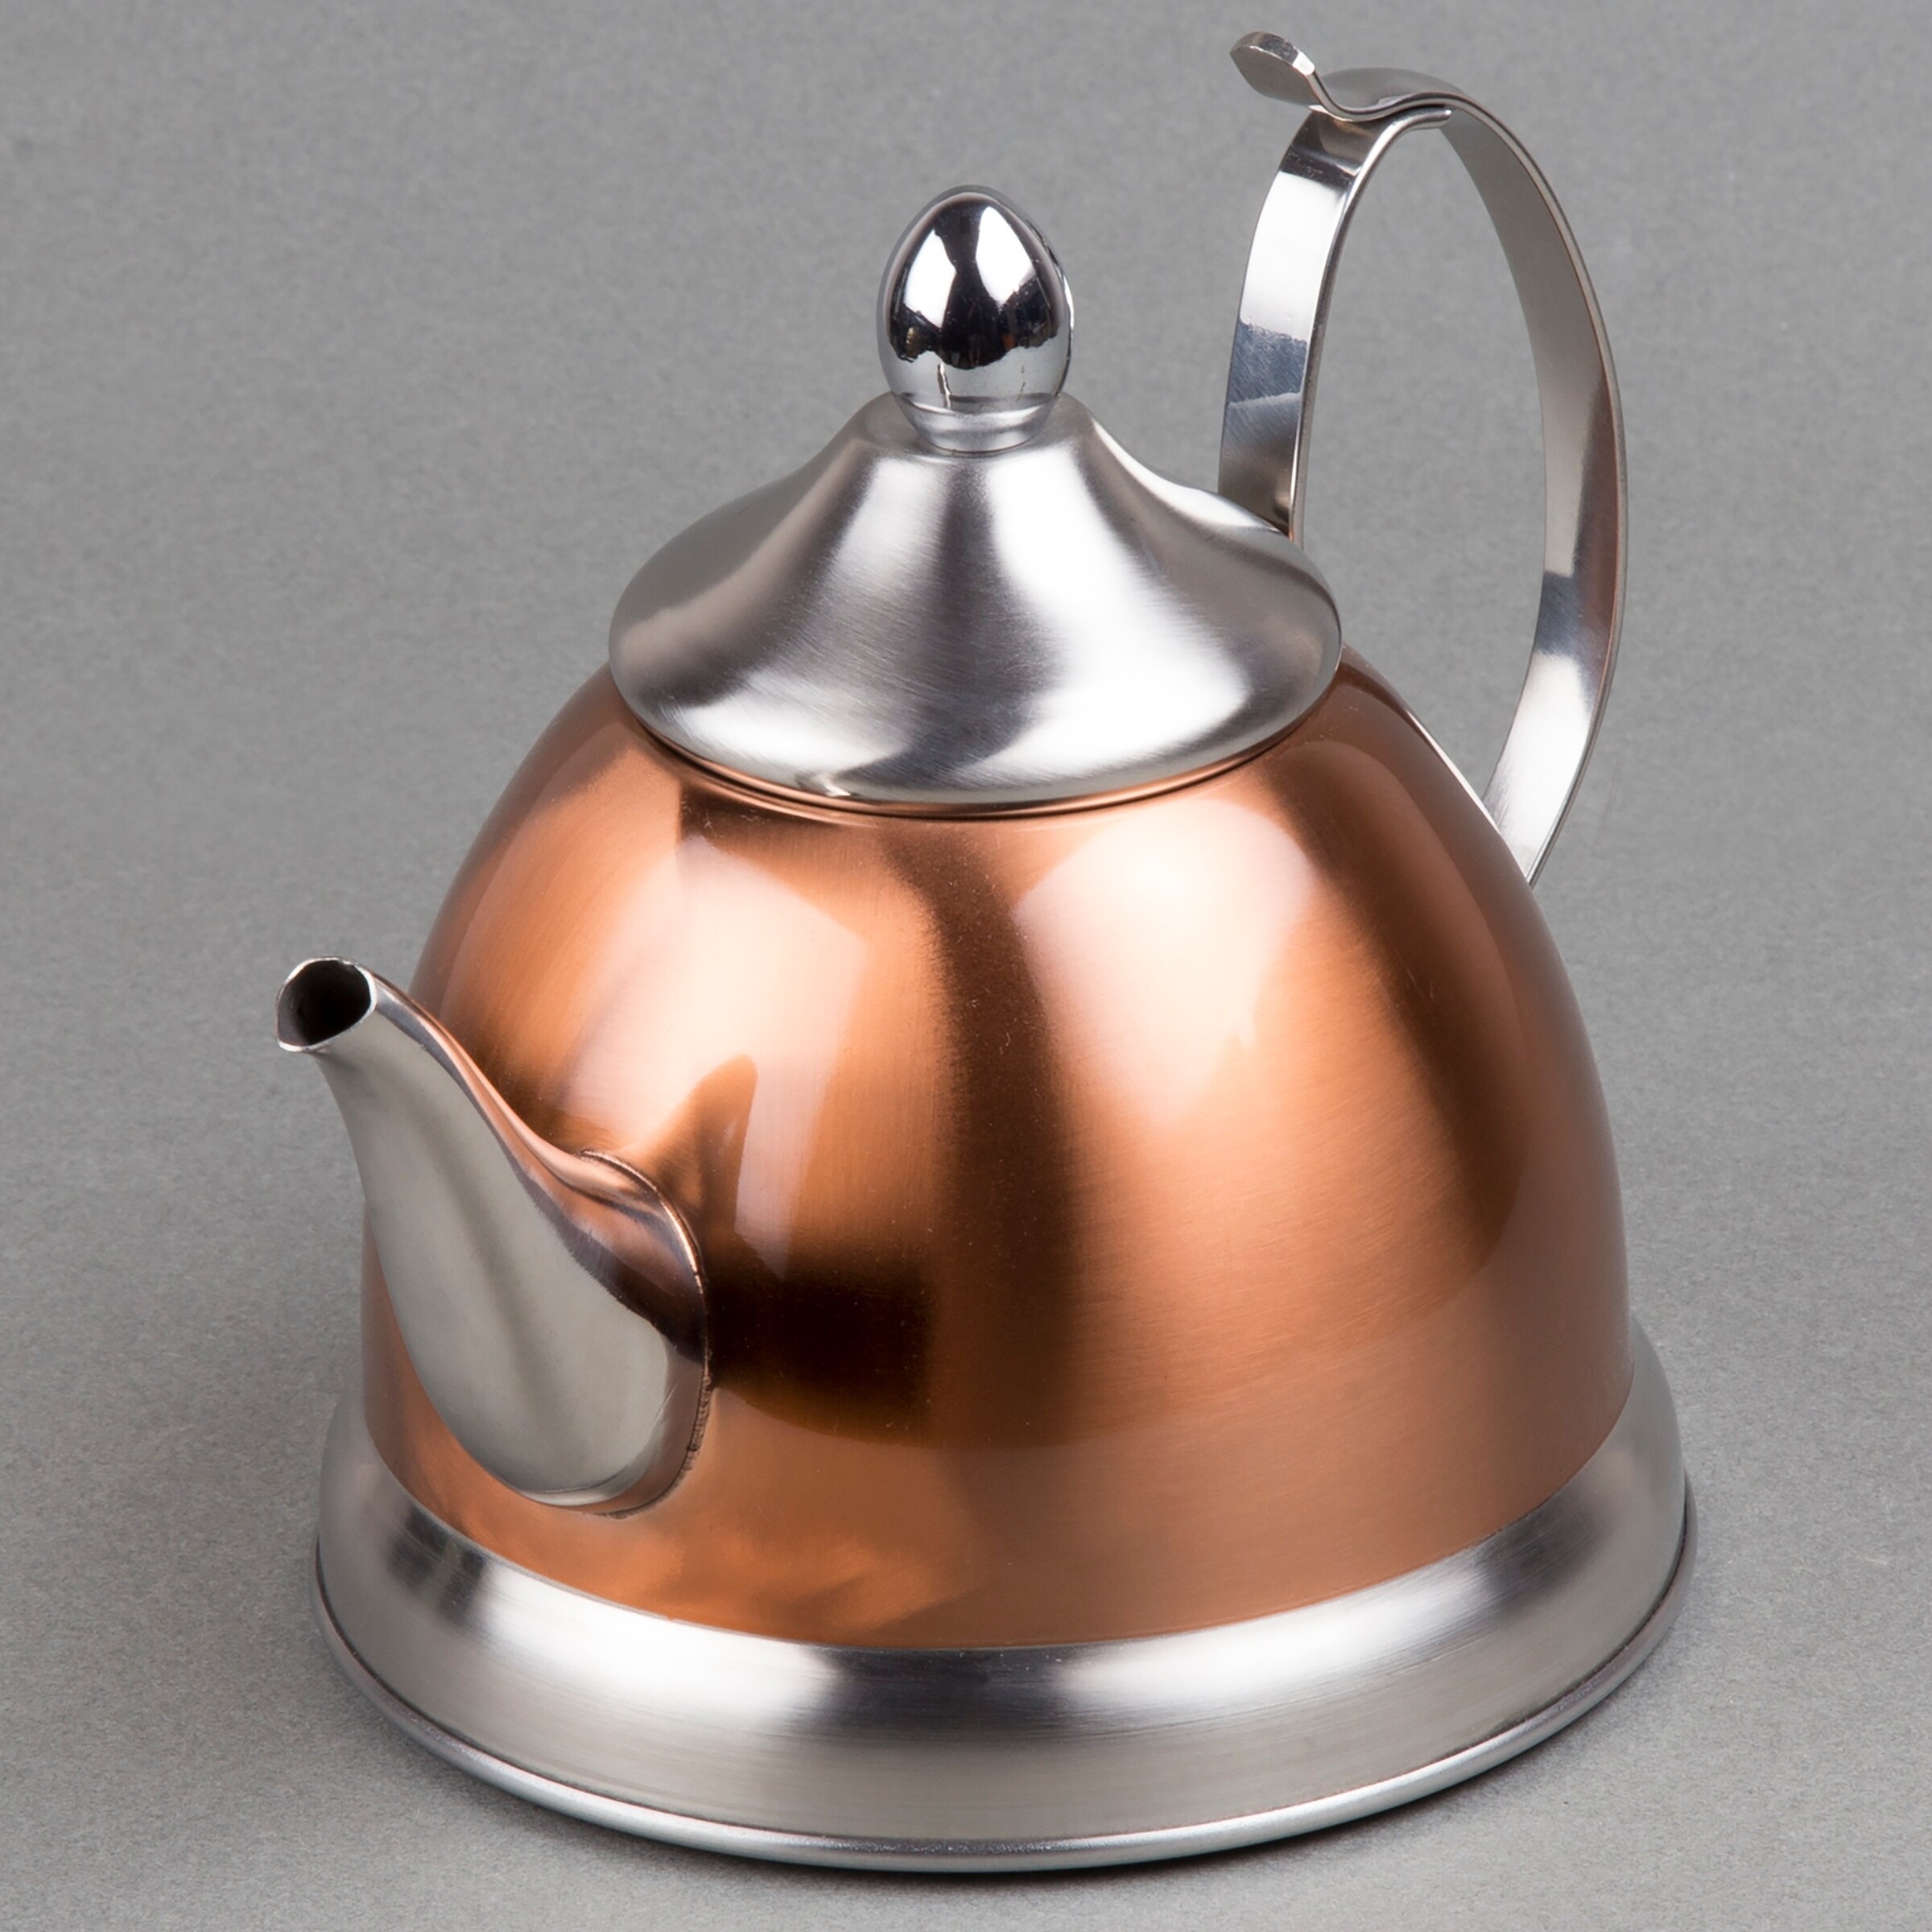 Creative Home Nobili-Tea 1.0 Quart Stainless Steel Tea Kettle Teapot with  Removable Infuser Basket, Cranberry Color - Bed Bath & Beyond - 10669200